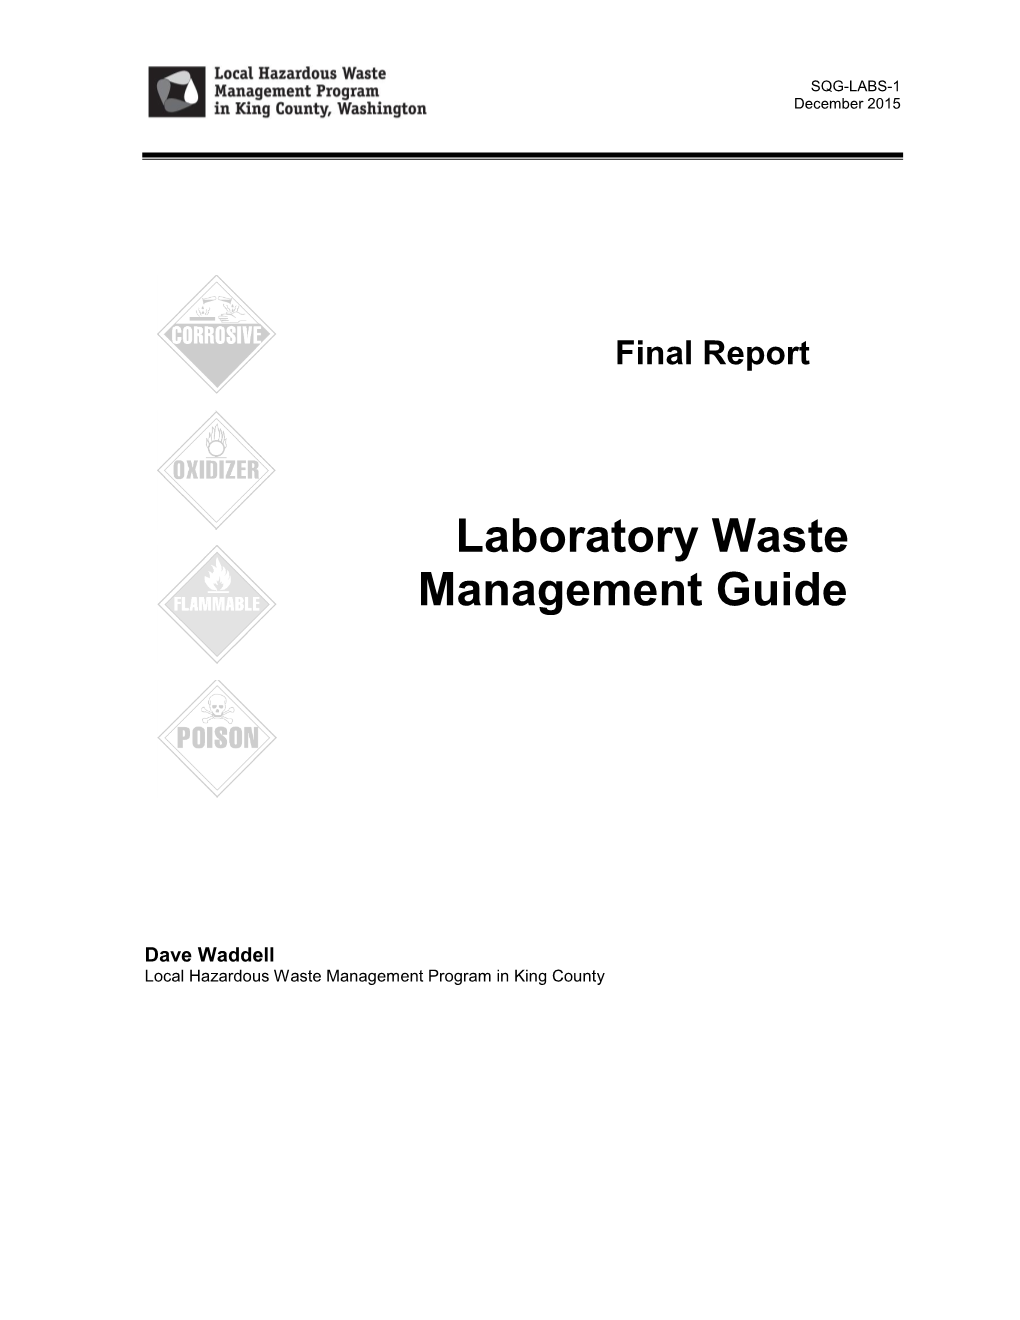 Laboratory Waste Management Guide